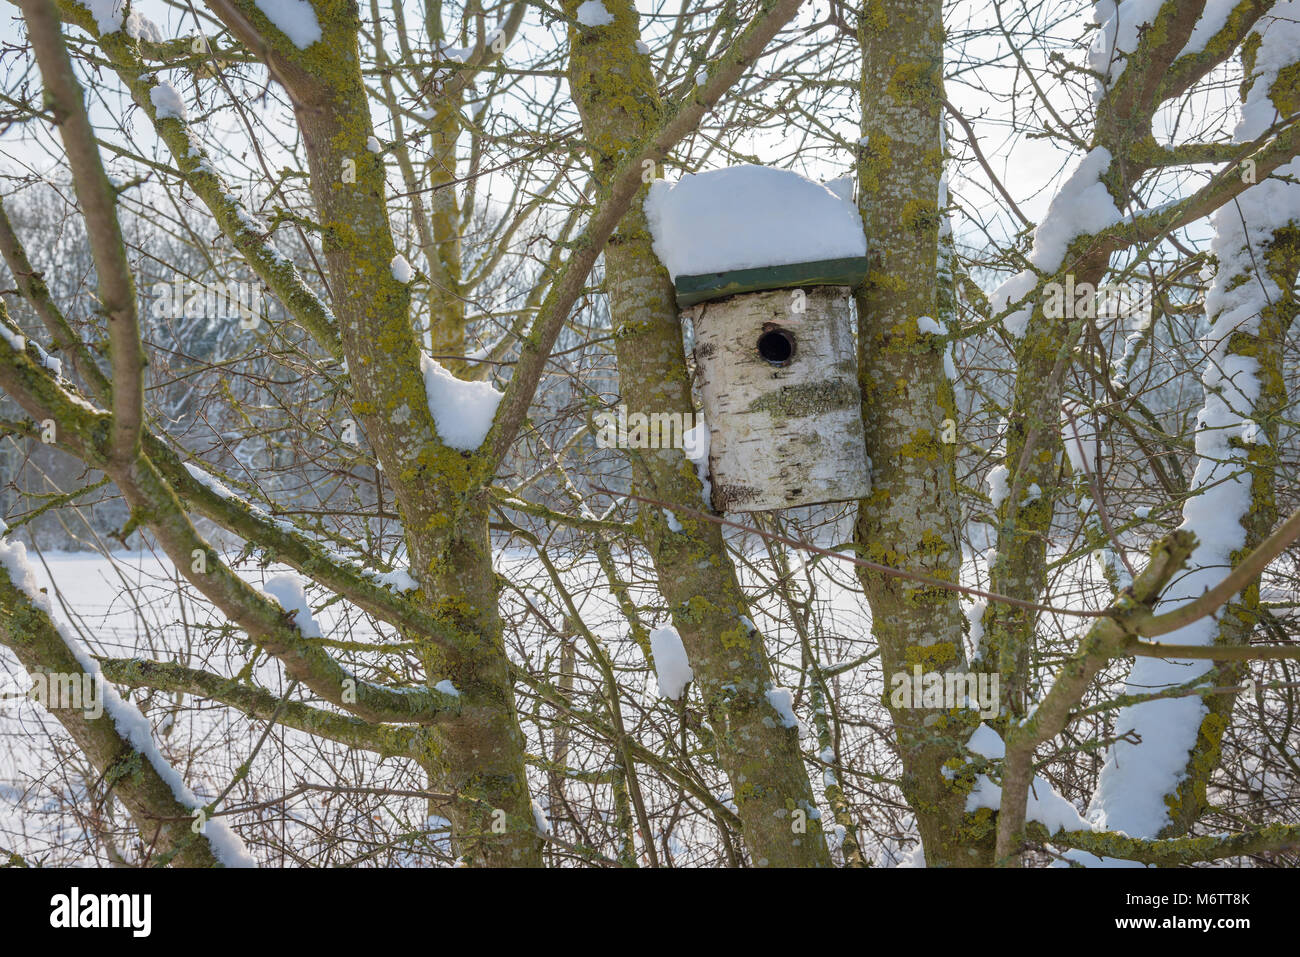 Winter brings snowfall to the rural Lincolnshire countryside near Bourne. A nesting box for birds sit in a tree covered in snow. Stock Photo